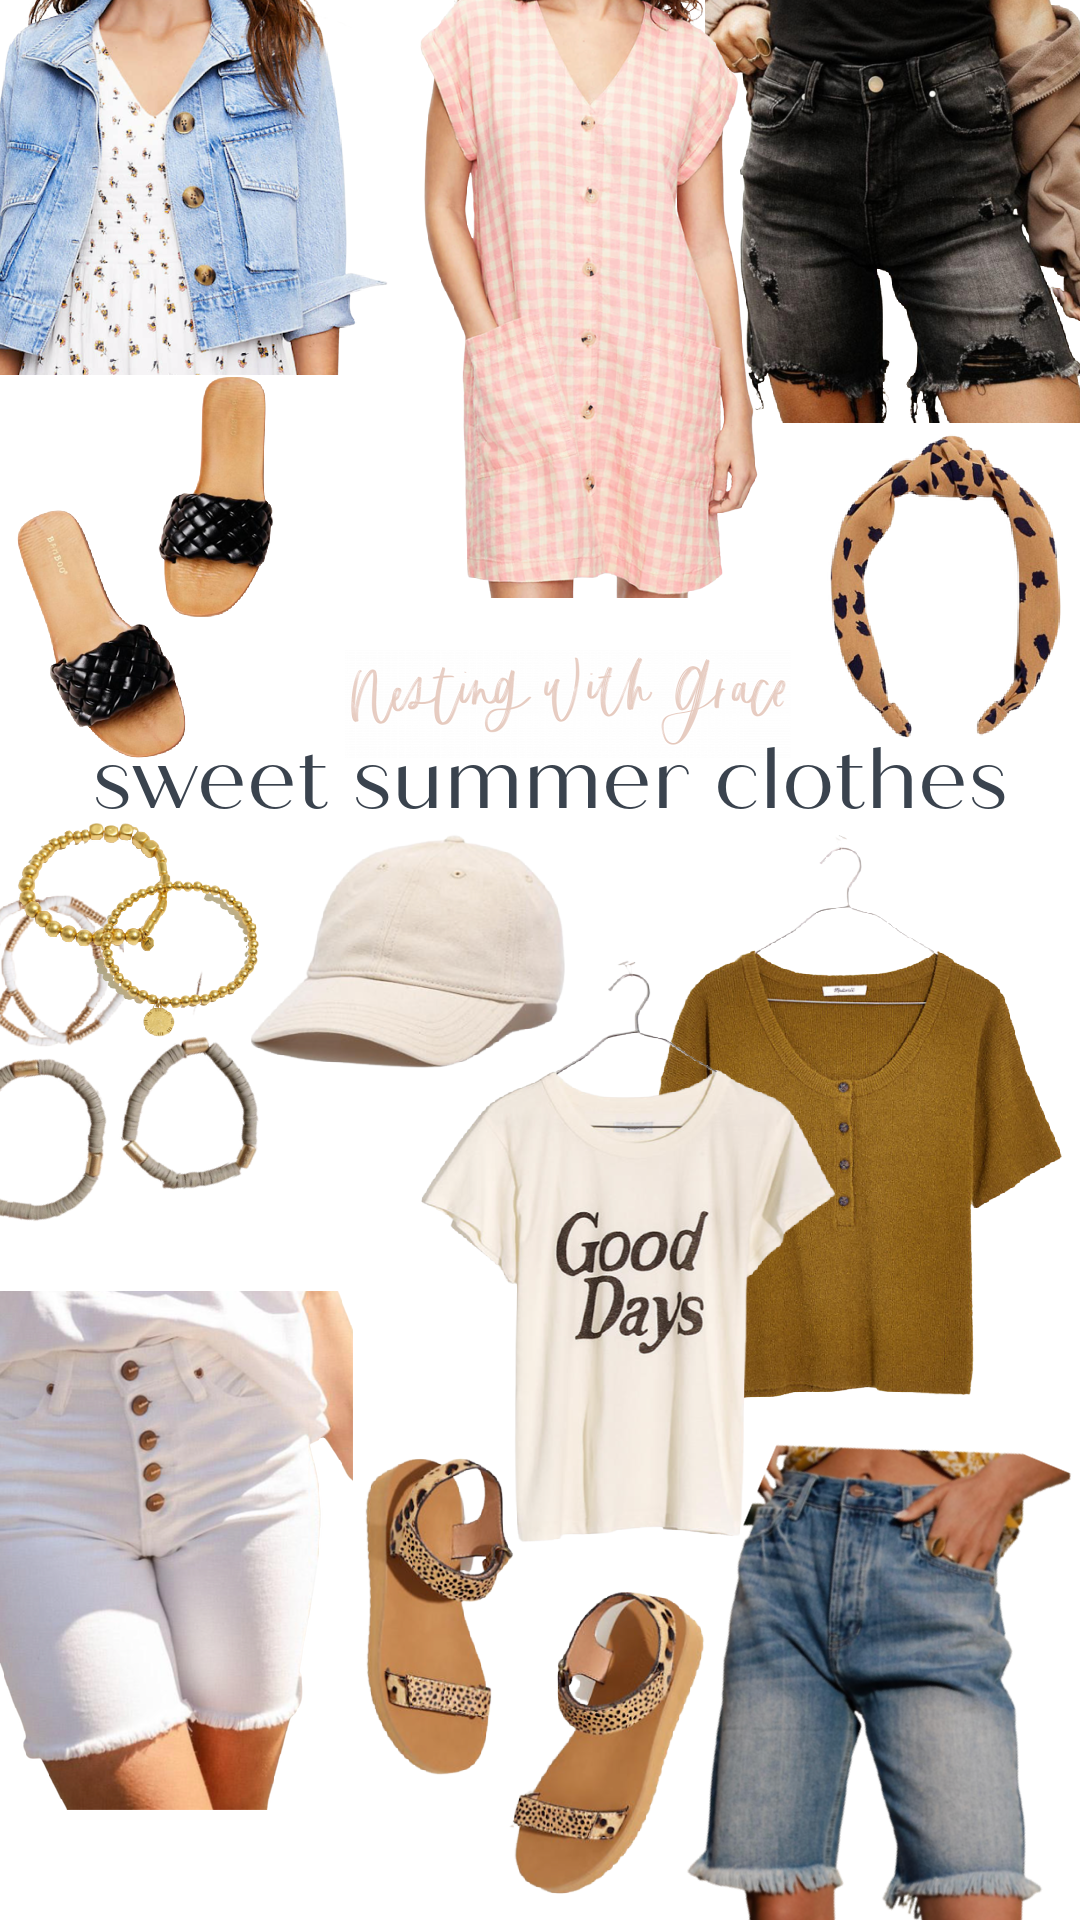 Summer Clothes- Best Bermuda Shorts - Nesting With Grace